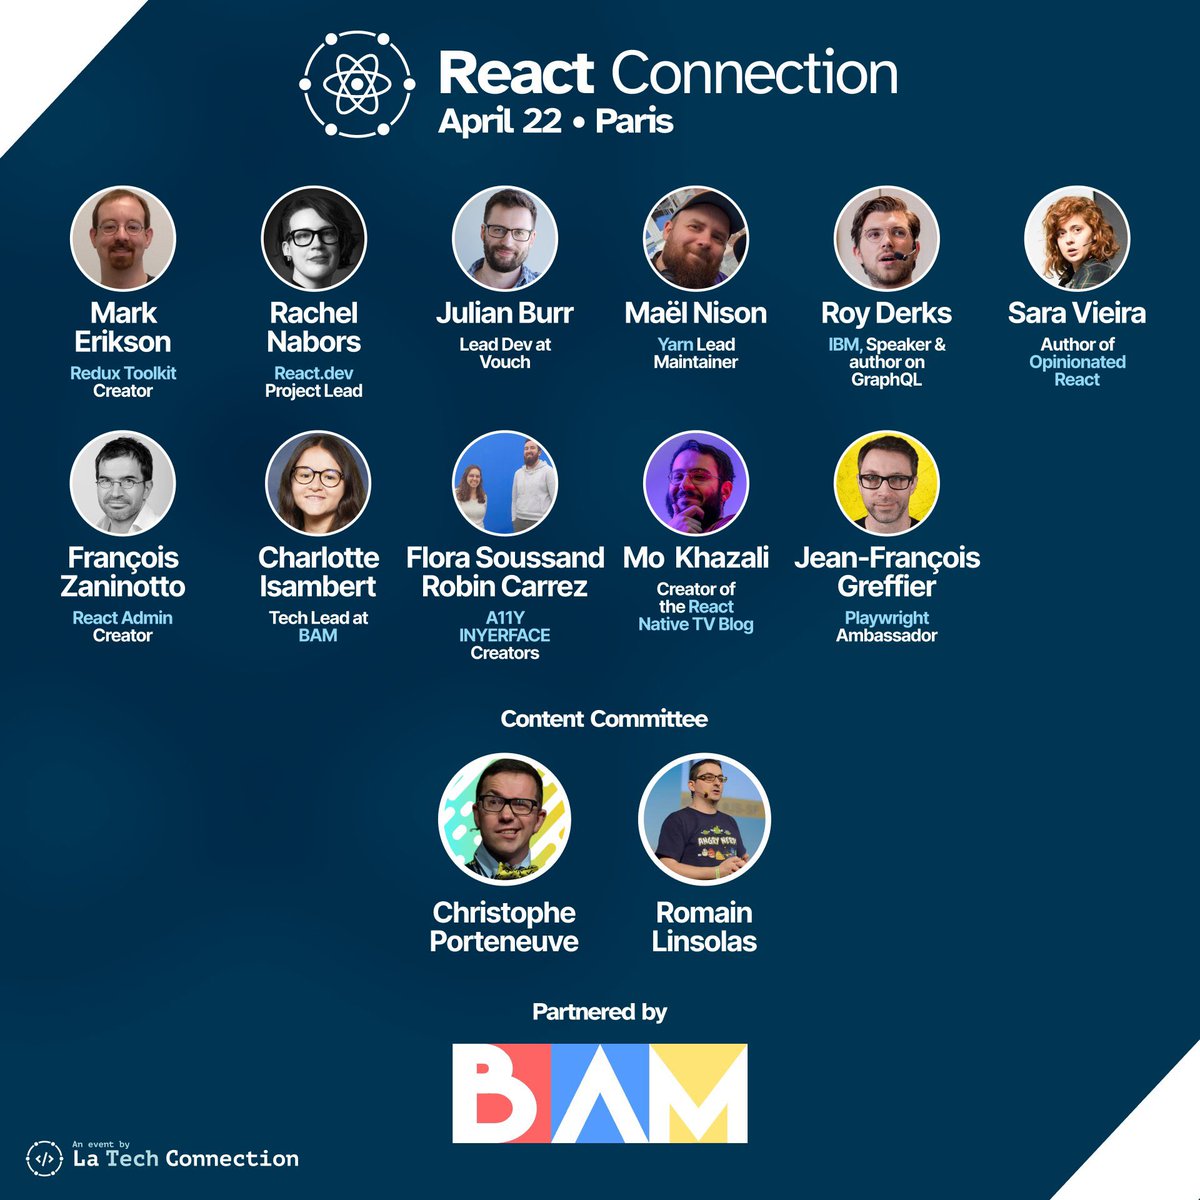 GraphQL and AI enthusiasts in Paris, I hope to meet at @reactconn Join me next week, as I discuss the state of GraphQL in React with Server Components. But that's not all - we'll also explore the impact of the AI revolution on GraphQL.